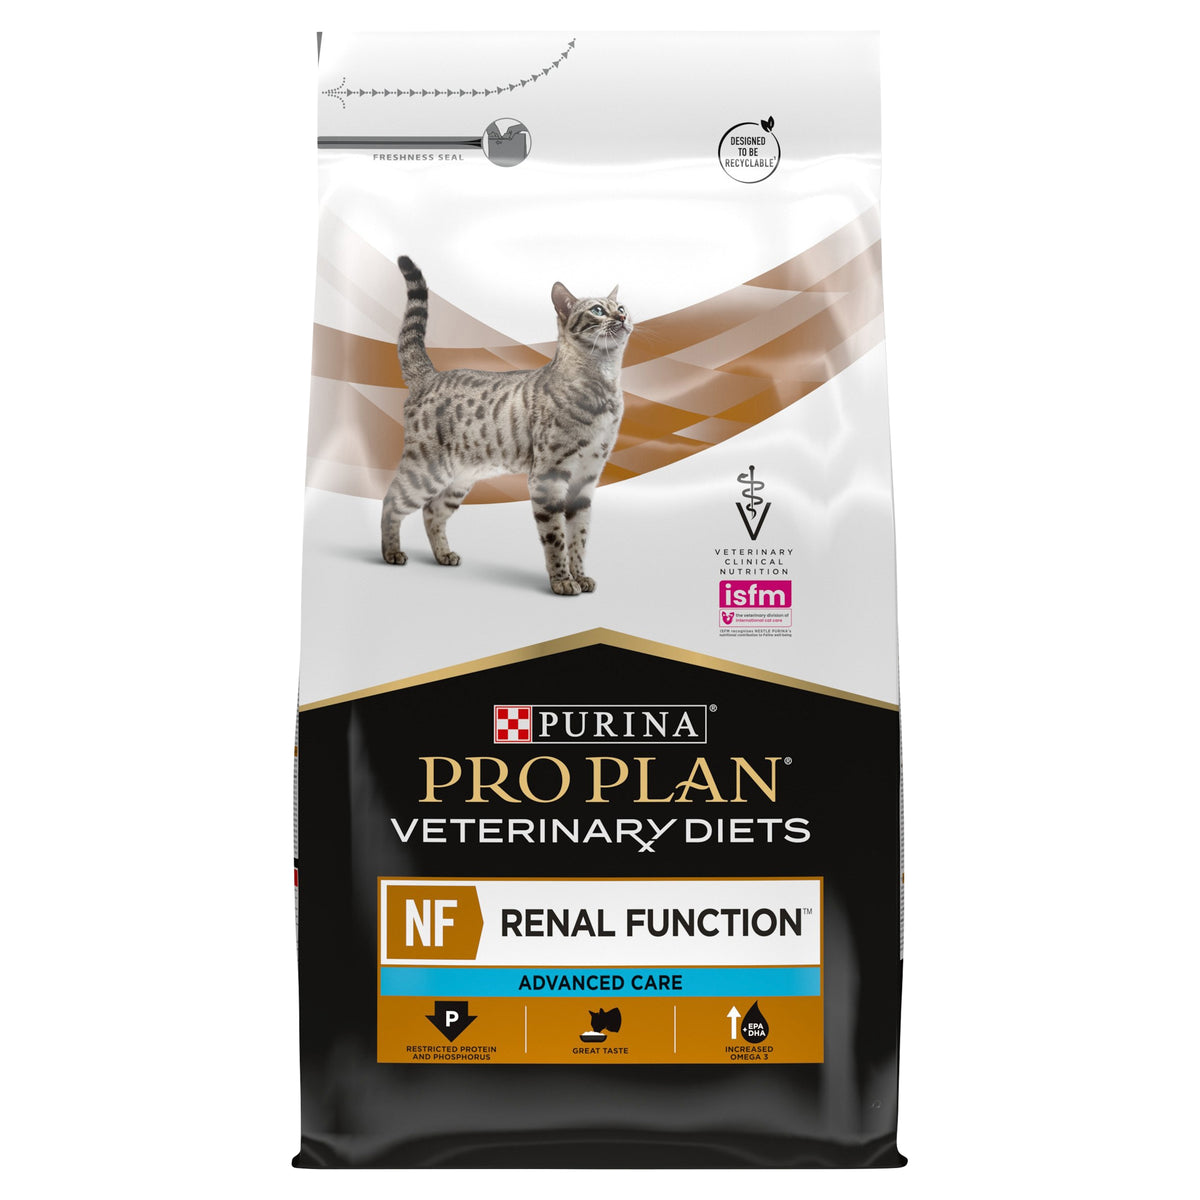 PURINA® PRO PLAN® Veterinary Diets - Feline NF Advanced Care Renal Function